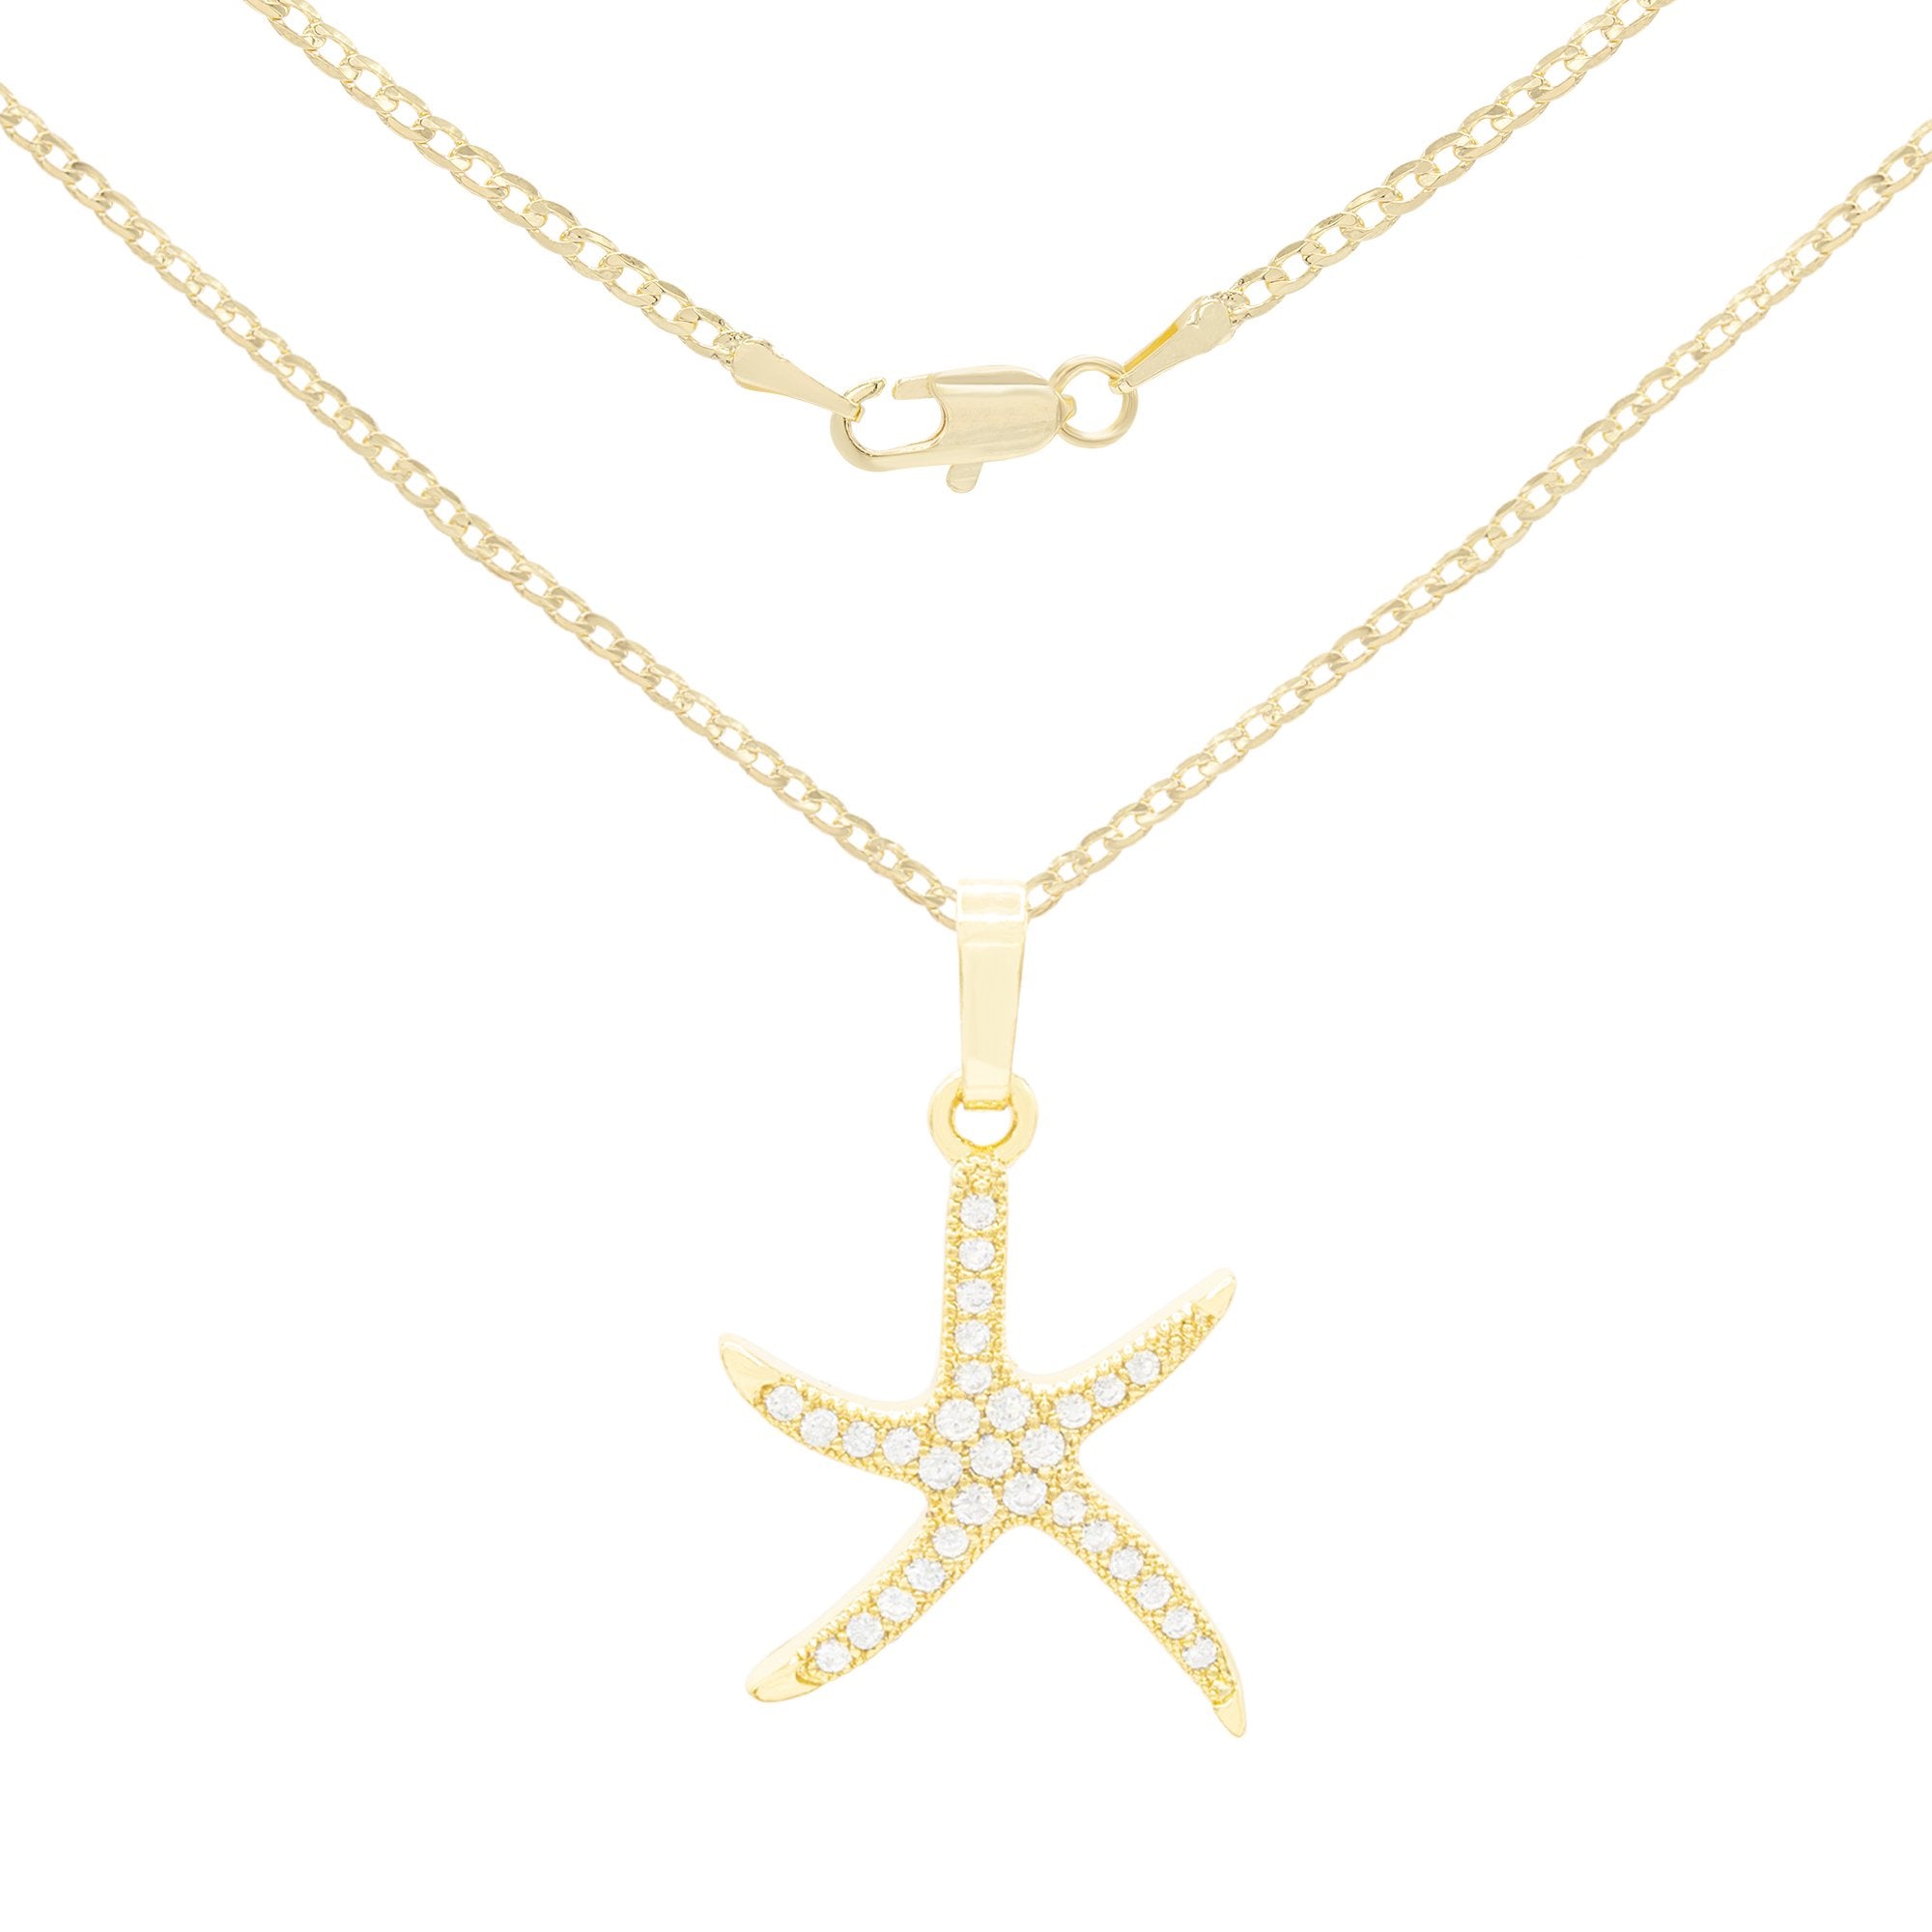 Ocean Starfish Cubic Zirconia Pendant With Necklace Set 14K Gold Filled